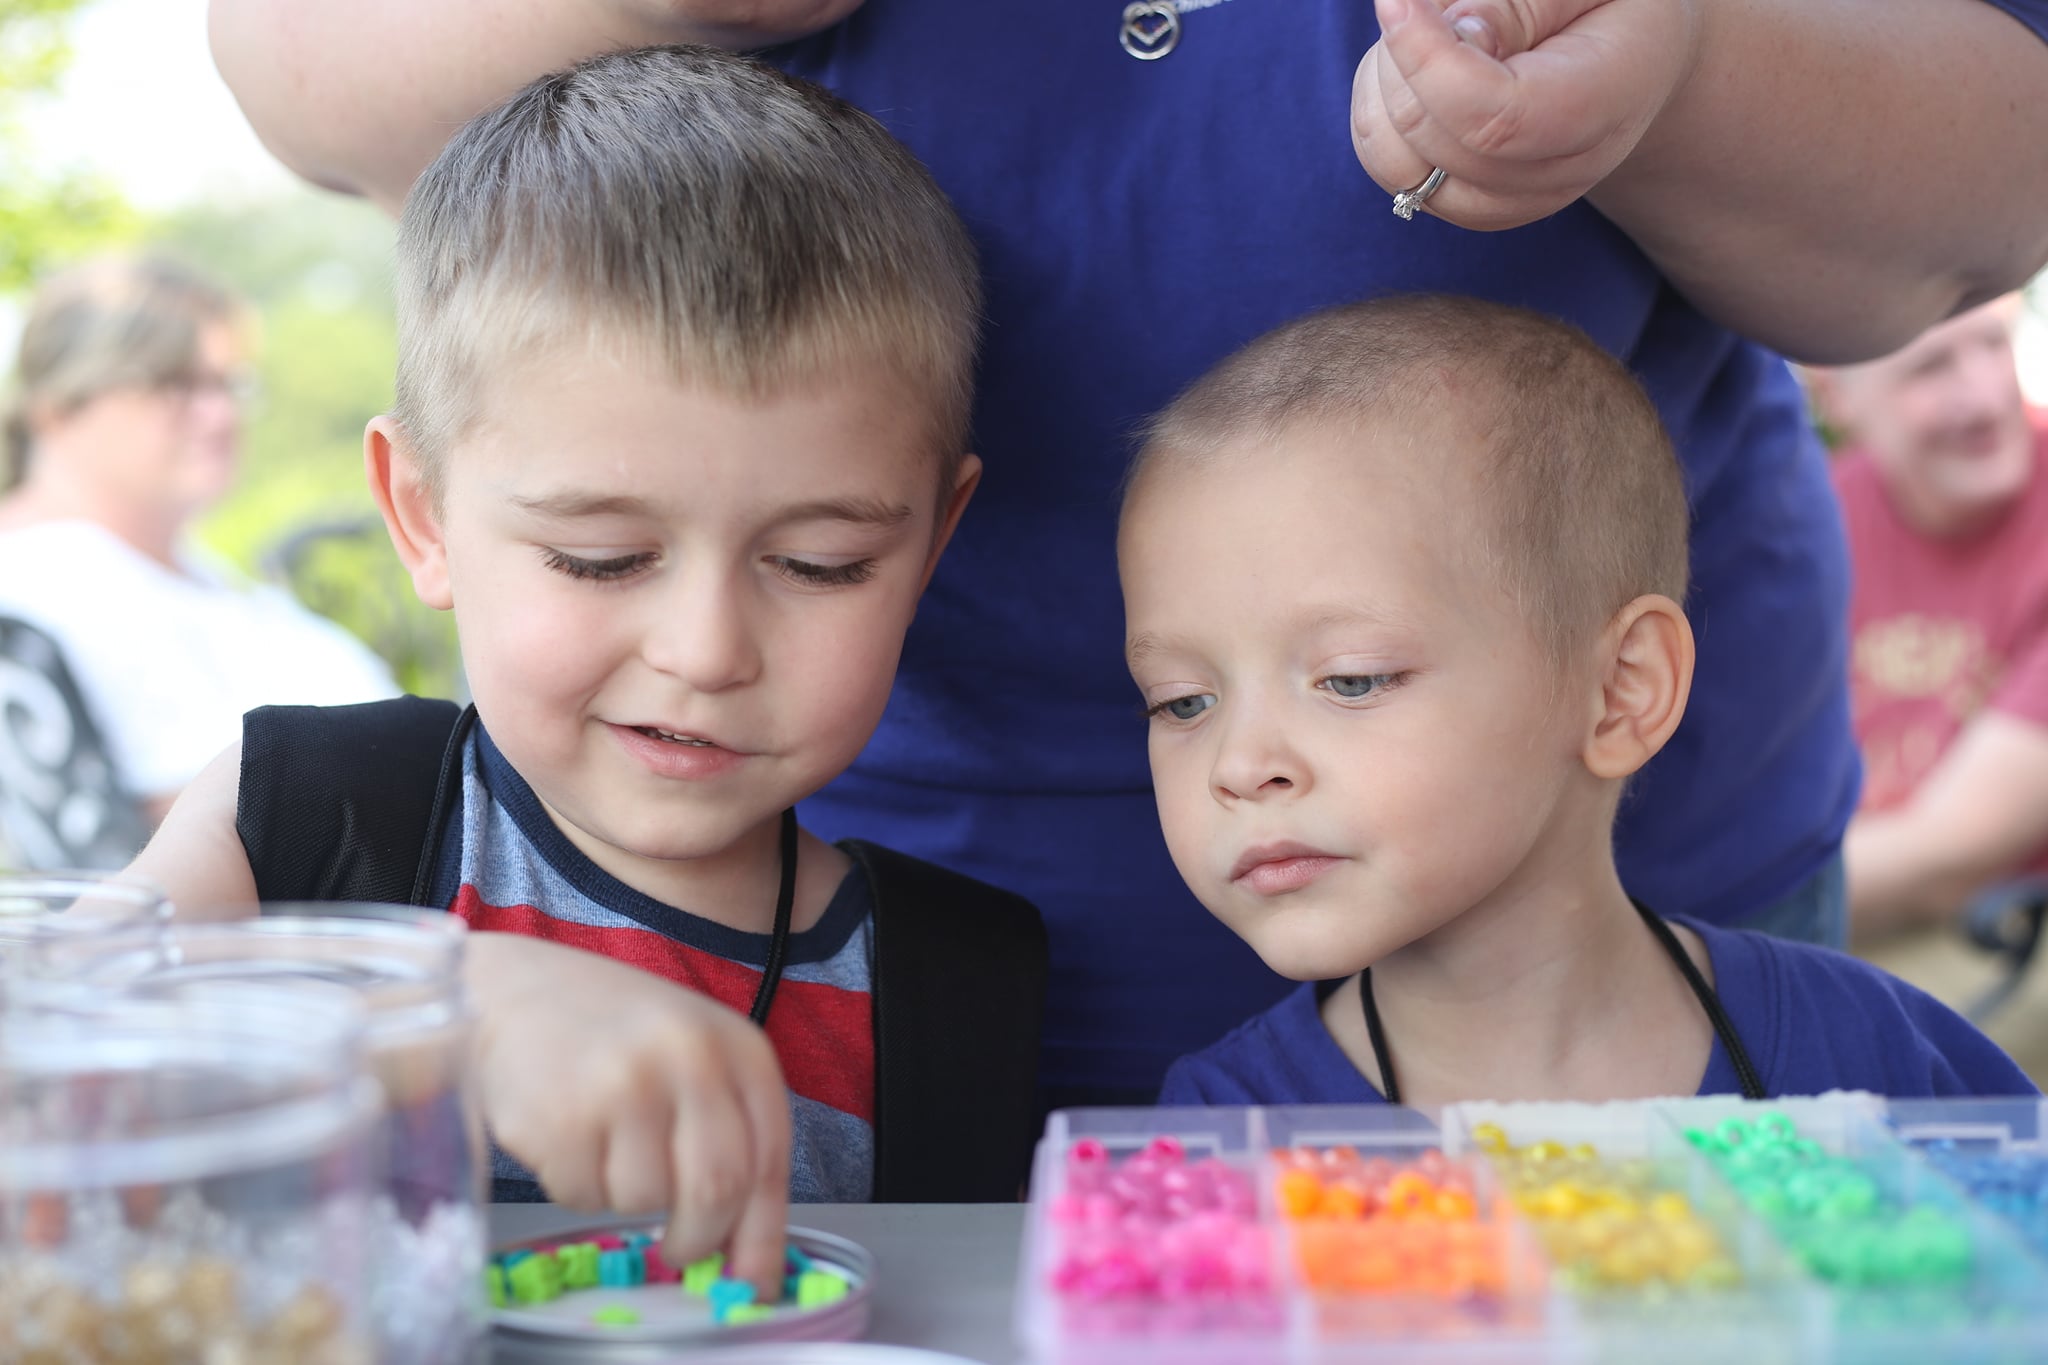 Two young boys look through a carton of colorful beads for their craft projects.